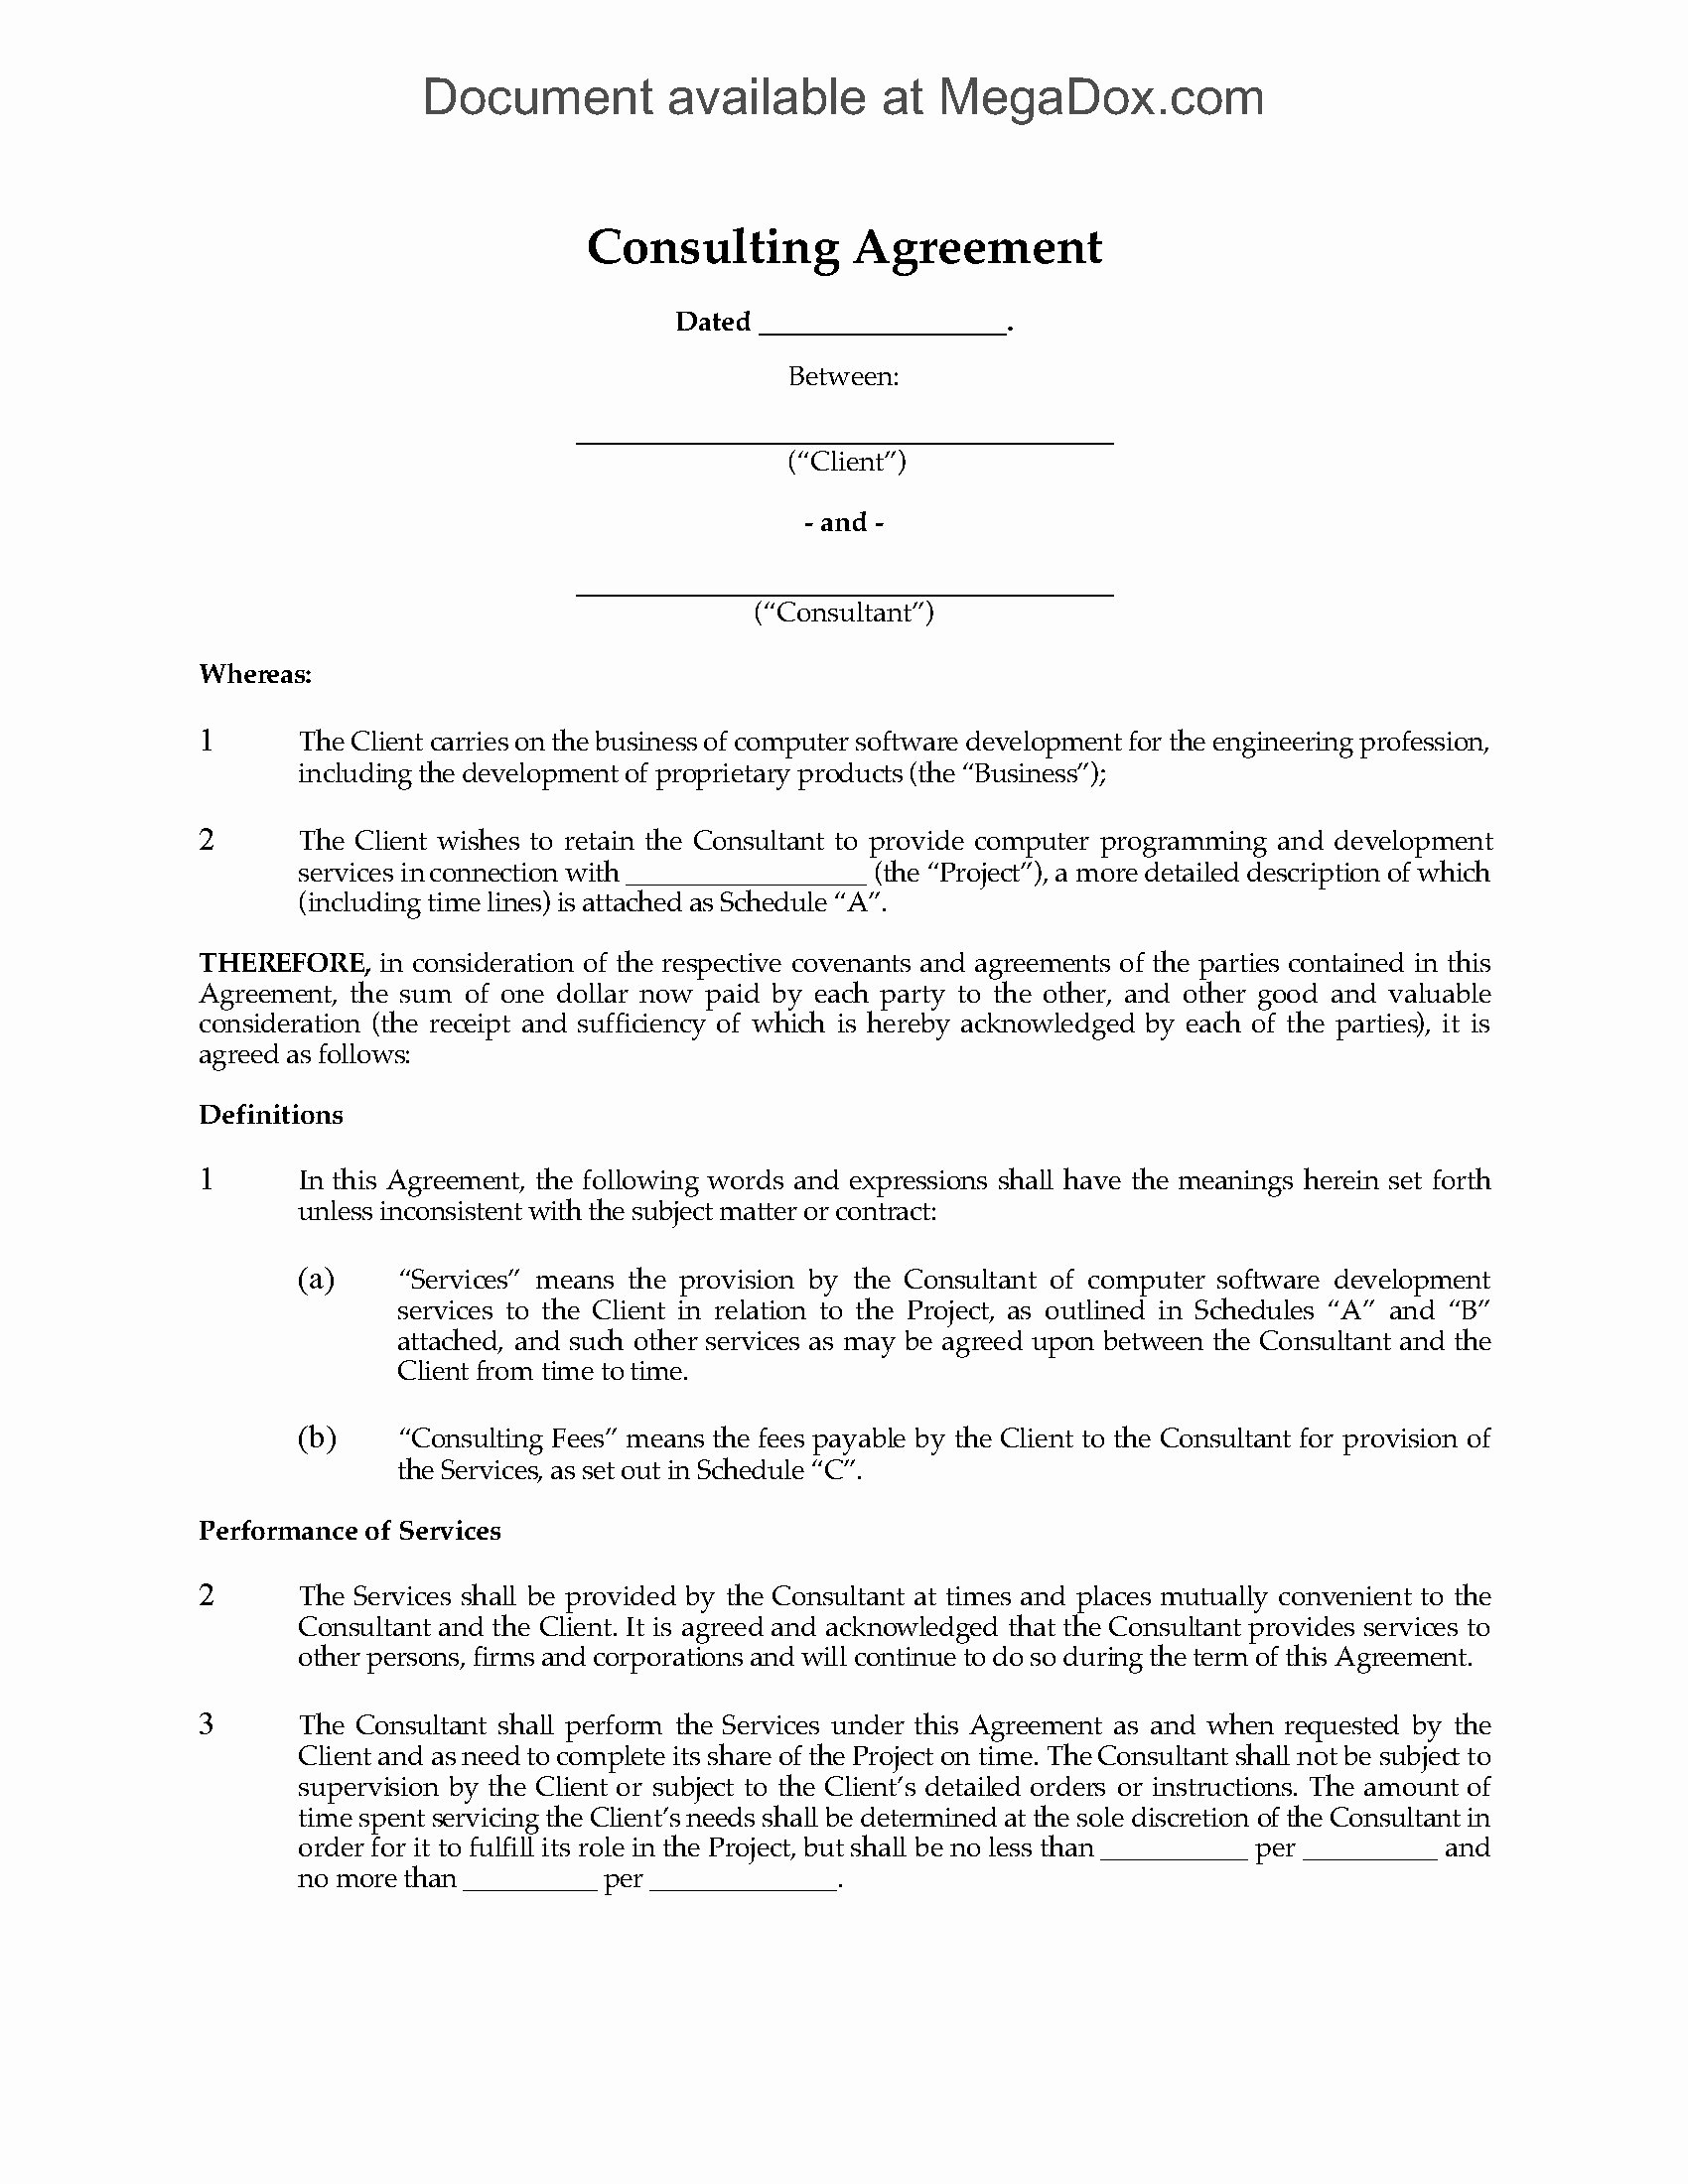 Free Consulting Agreement Template Luxury Canada Consulting Agreement for software Development